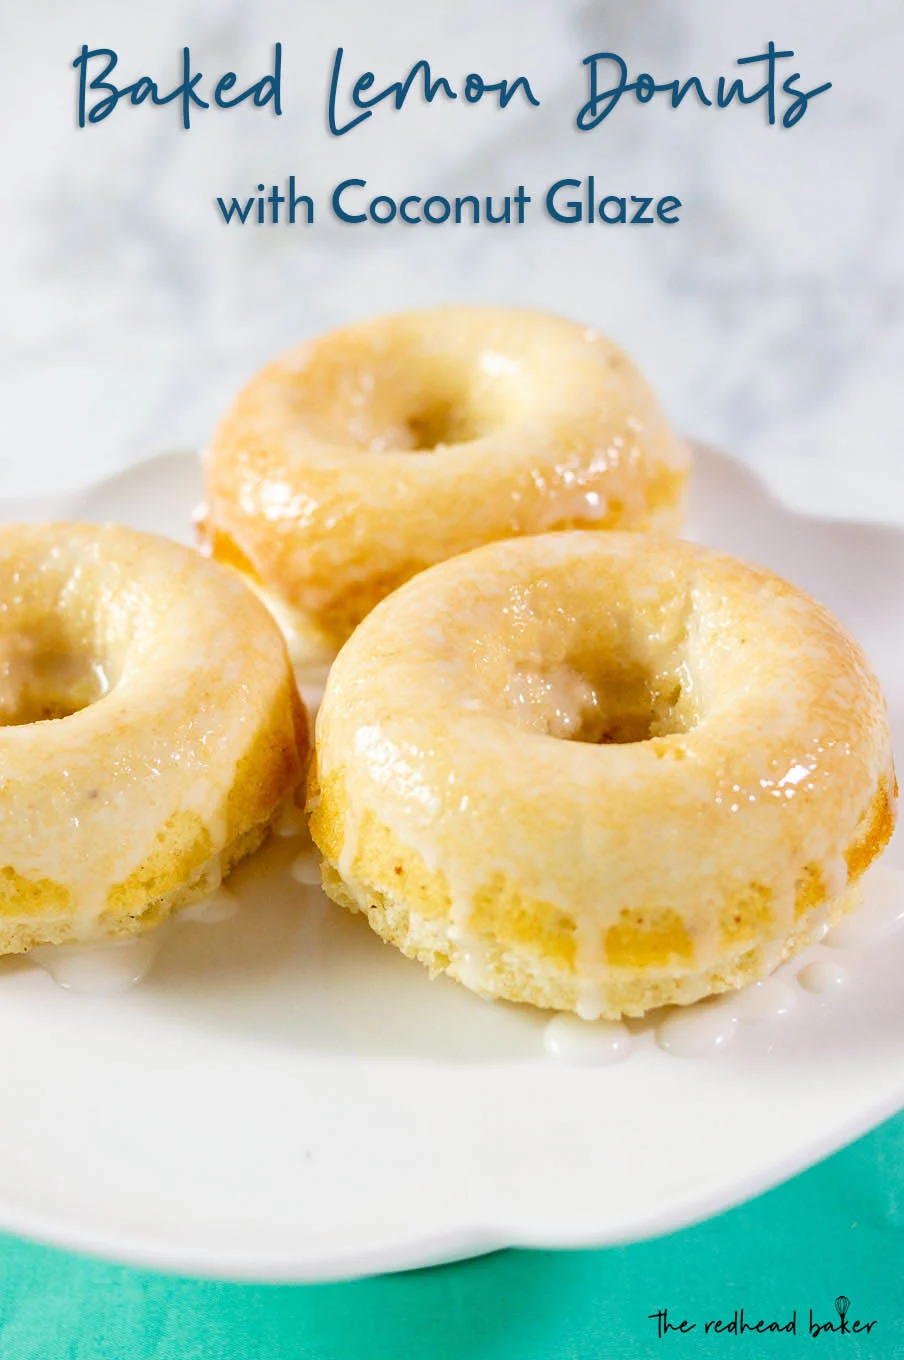 A close-up of three baked lemon donuts with coconut glaze